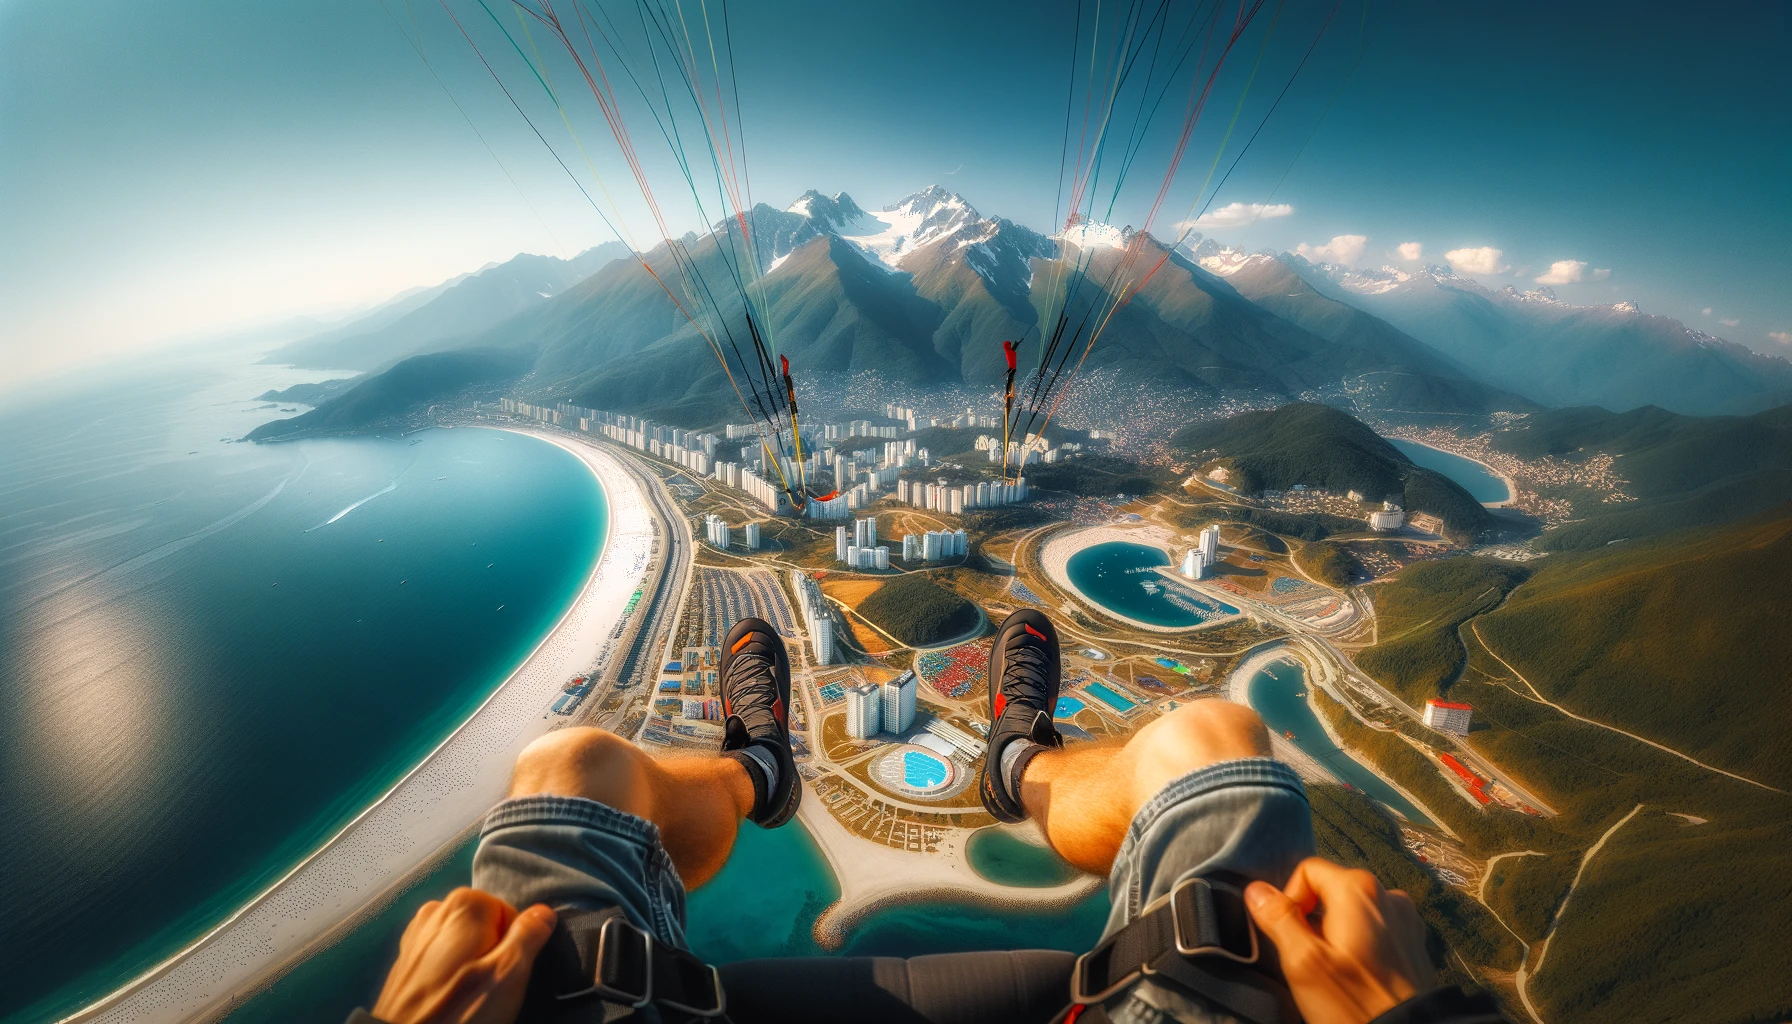 A view from a paraglider's perspective high above the Olympic Village in Sochi, with the paraglider's legs visible in the foreground, overlooking the sandy beaches and clear blue waters, and the mountainous backdrop of the Krasnaya Polyana ski resort. The image should capture the thrilling perspective of flying above this unique coastal and mountainous landscape, showcasing the beauty of Sochi from the sky.